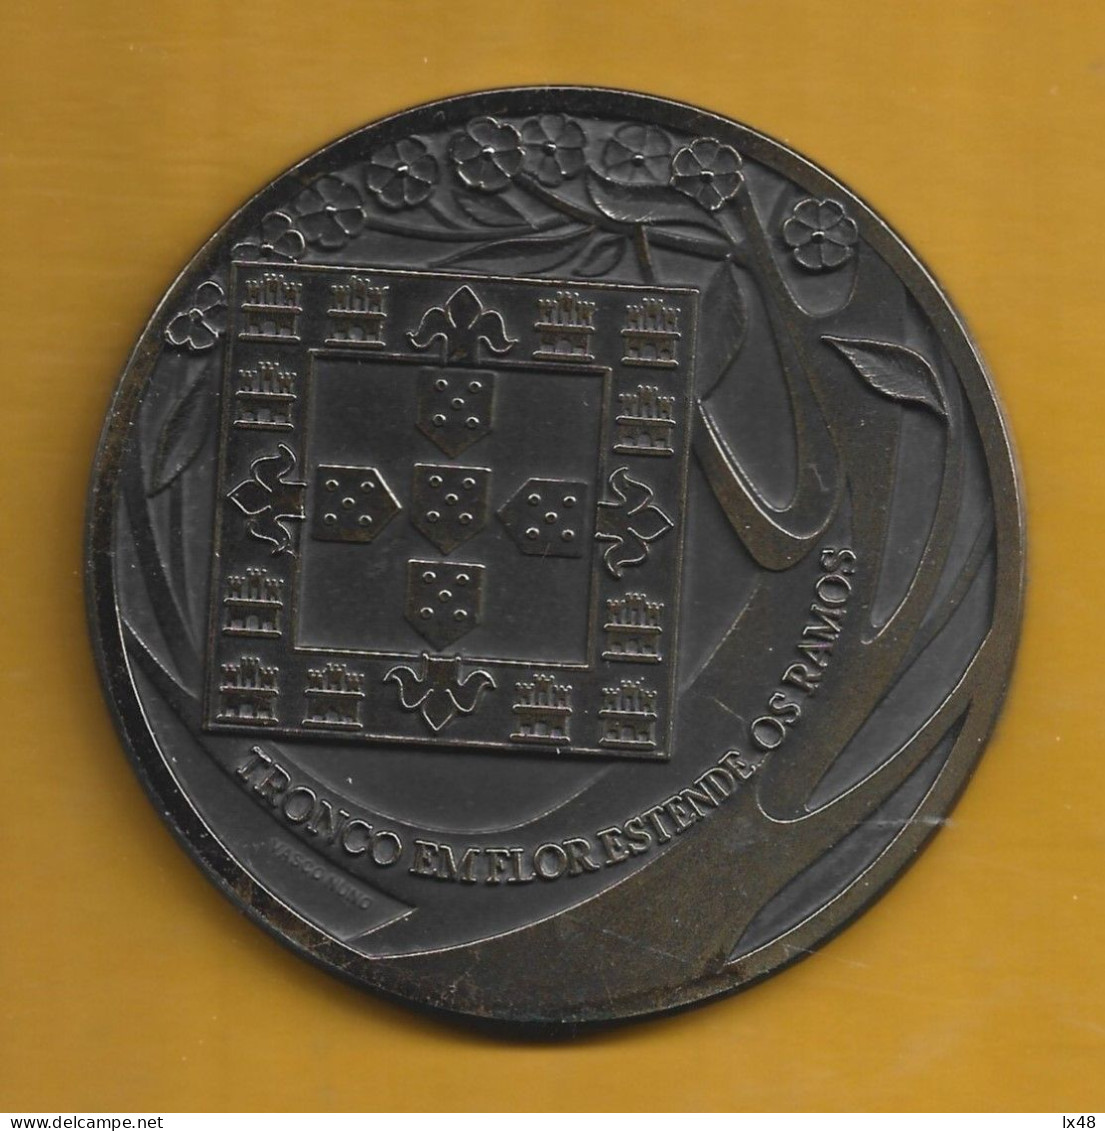 Mocidade Portuguesa. Portuguese Youth. Bronze Medal For 80th Years Of Portuguese Youth Foundation 1936/201. Portugiesisc - Professionals / Firms